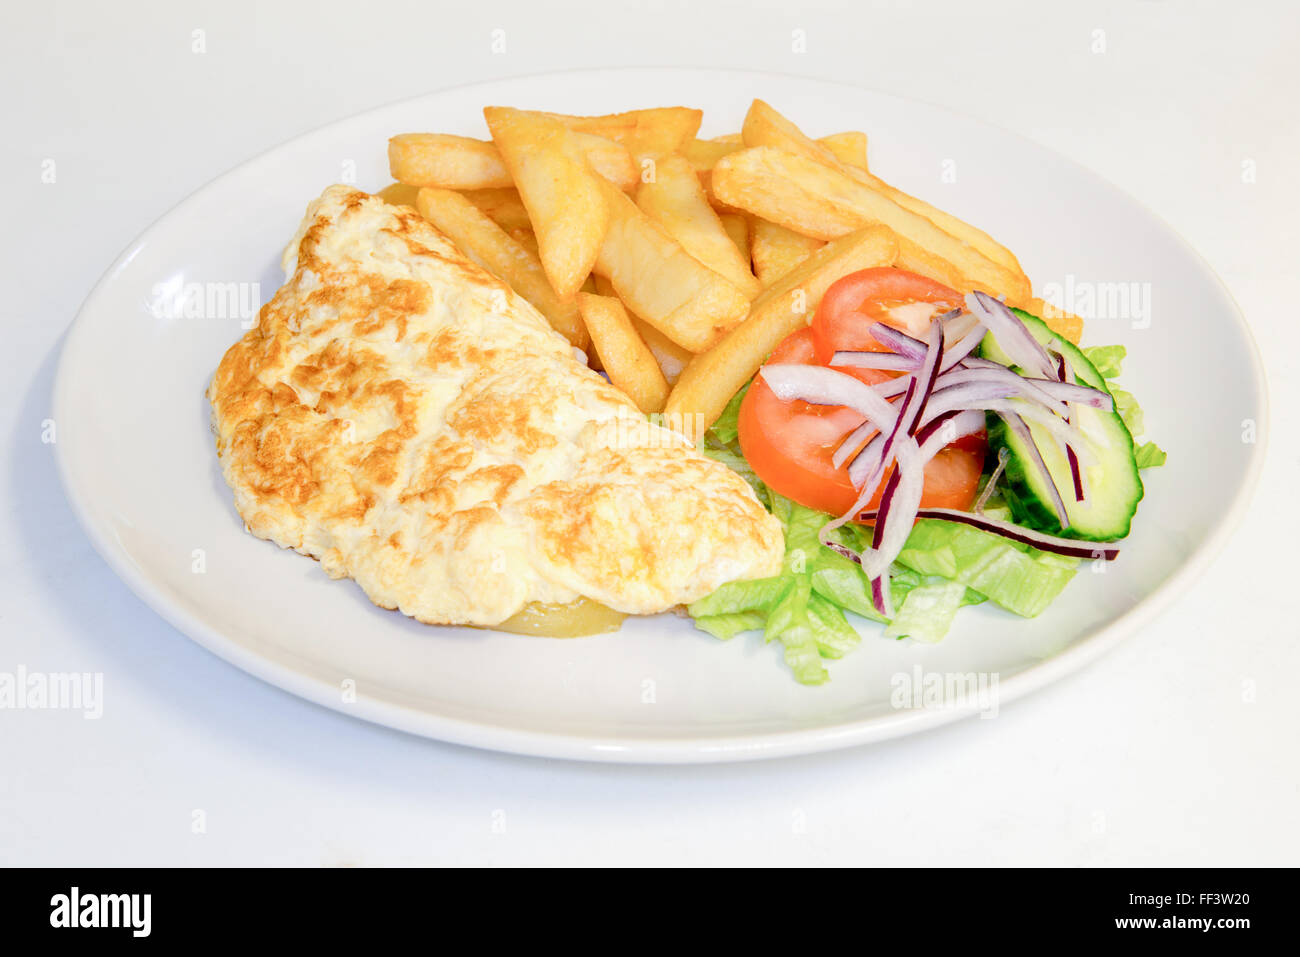 Omelette meal with chips and salad Stock Photo